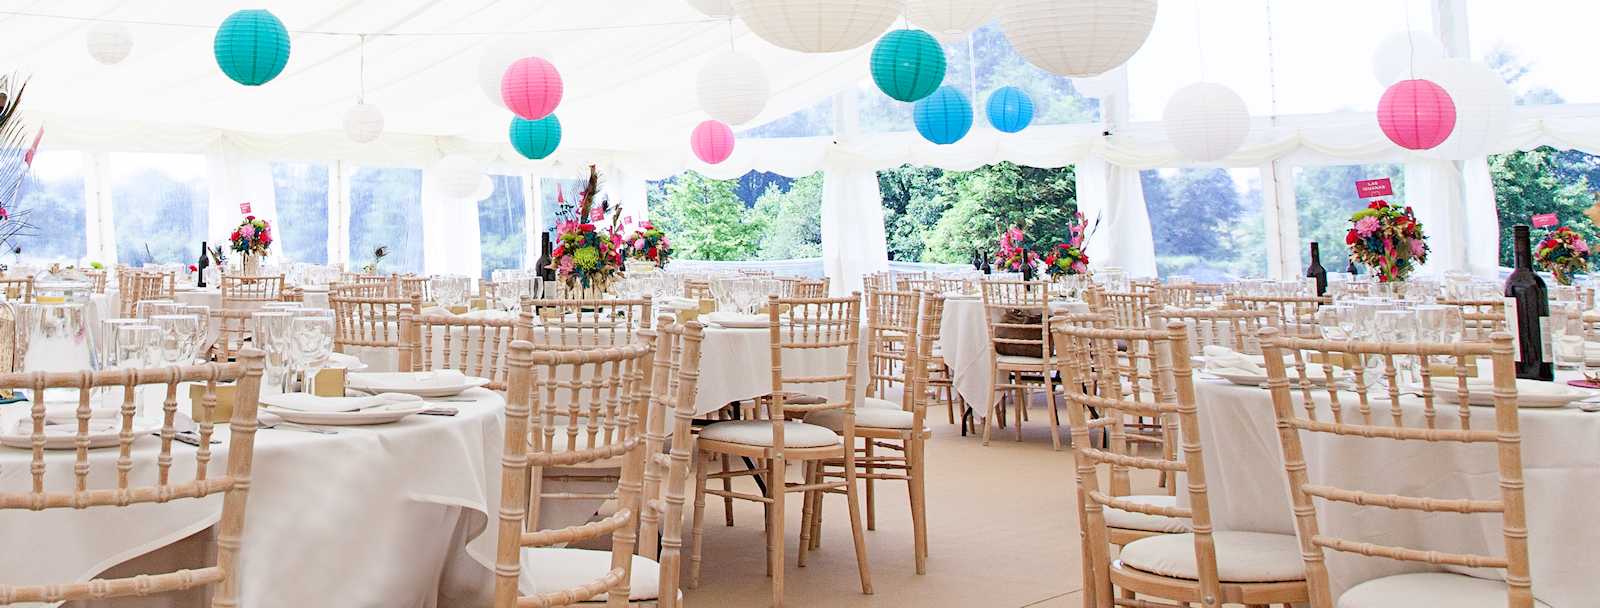 dining area in a wedding marquee